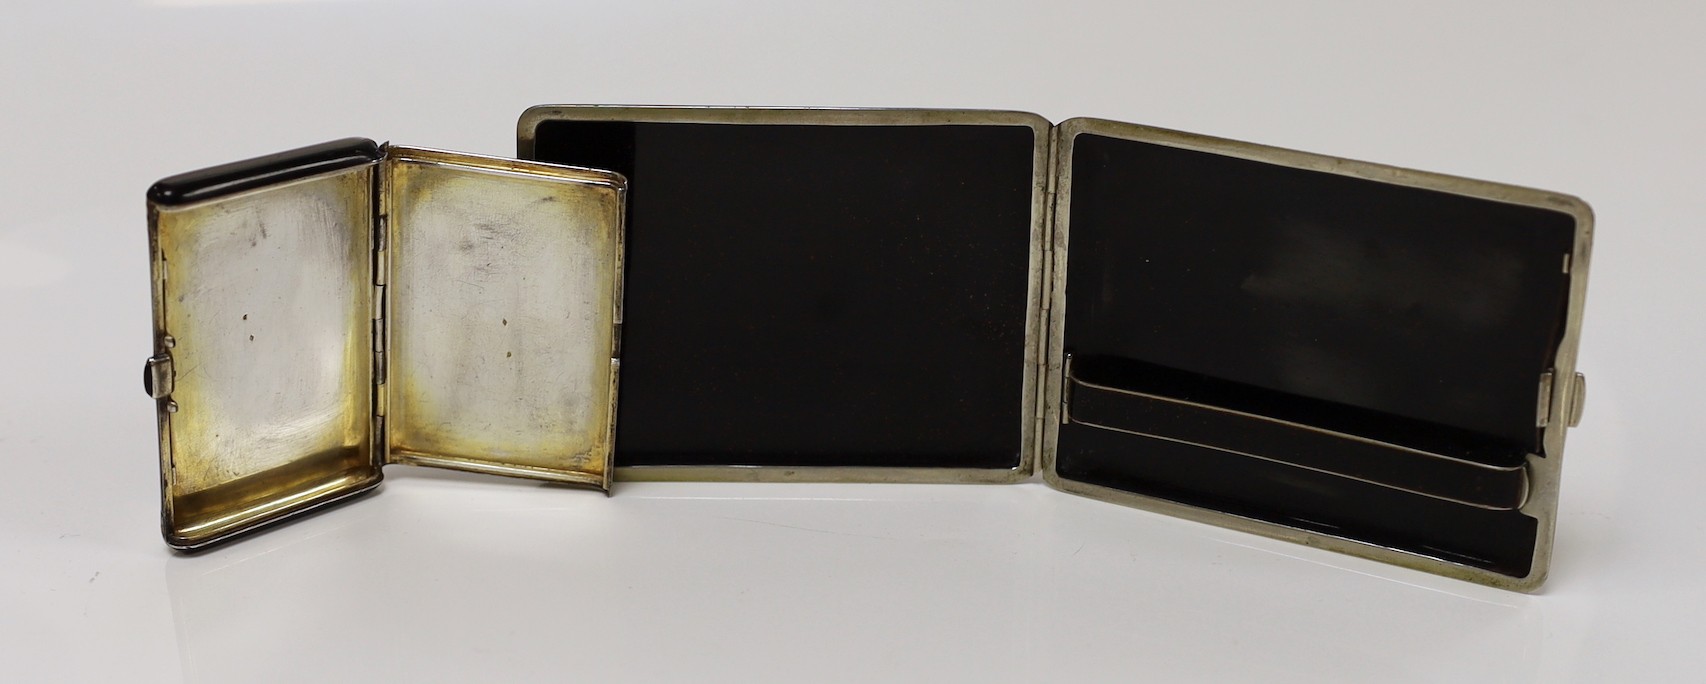 A French Art Deco white metal, black lacquer and eggshell banded cigarette case, with cabochon button, 8cm and one other similar larger cigarette case though apparently unmarked.